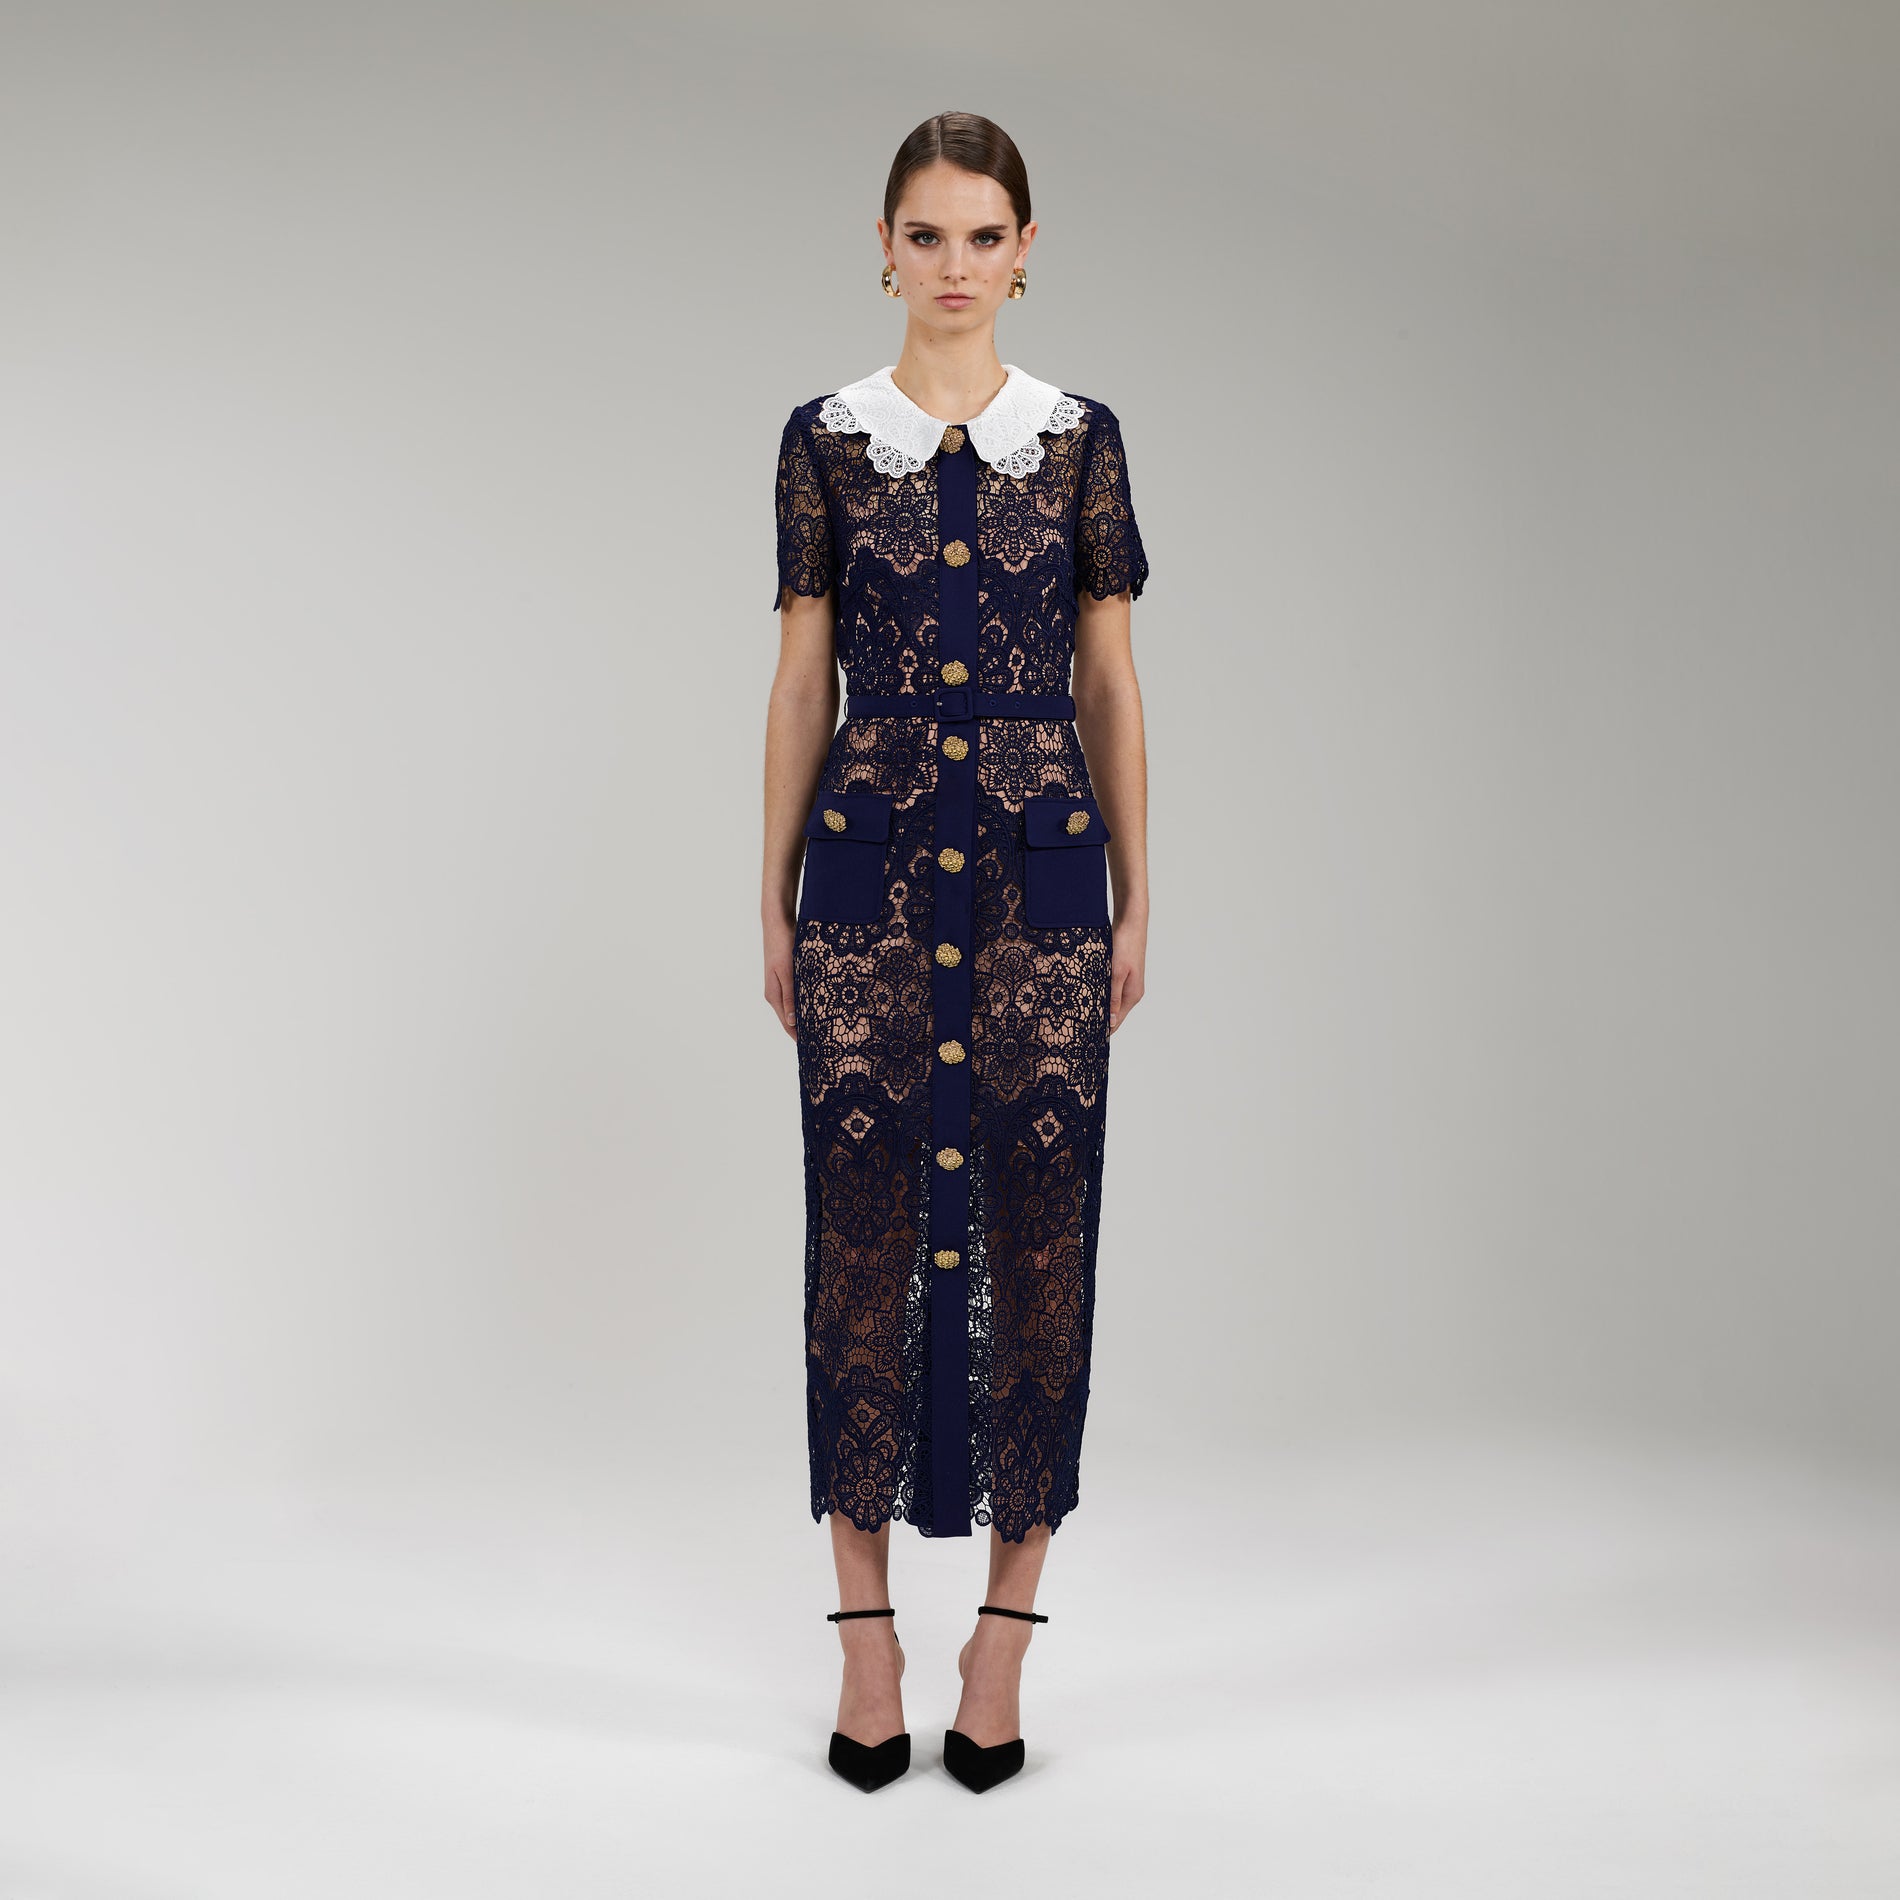 A woman wearing the Navy Floral Guipure Midi Dress